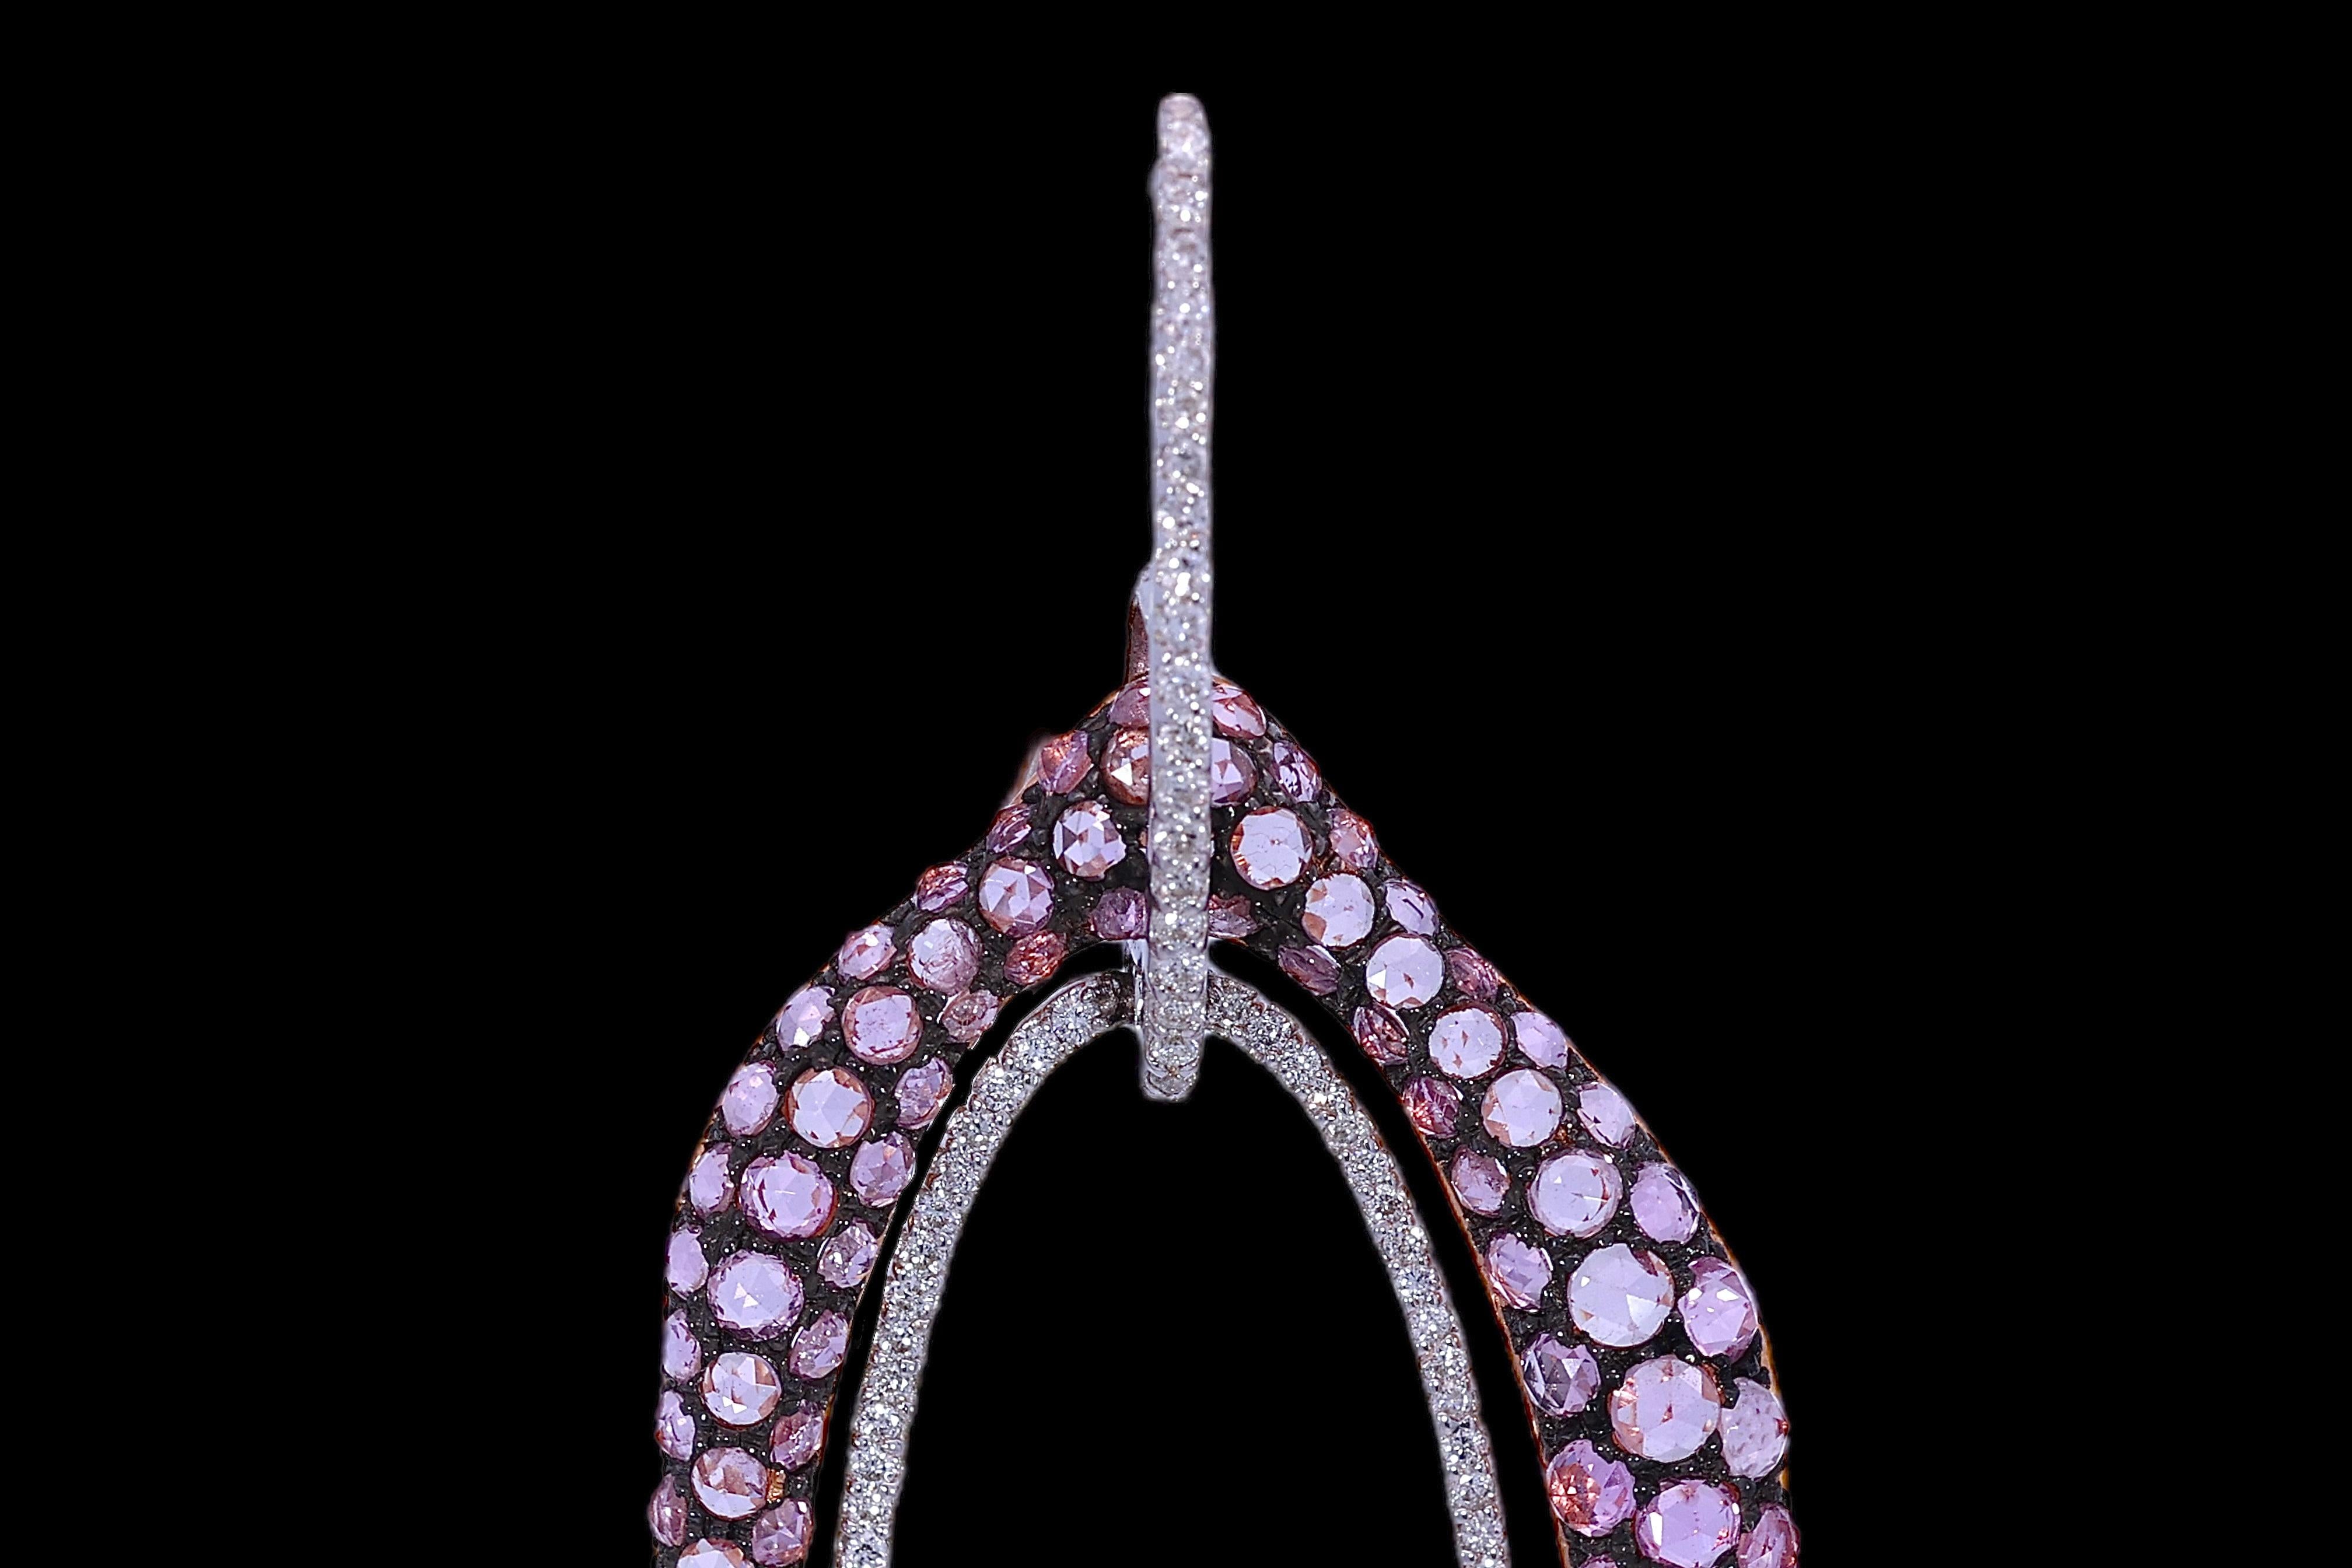 18kt. Gold Chatila Earrings With Rose Cut Sappphires & Brilliant Cut Diamonds For Sale 2